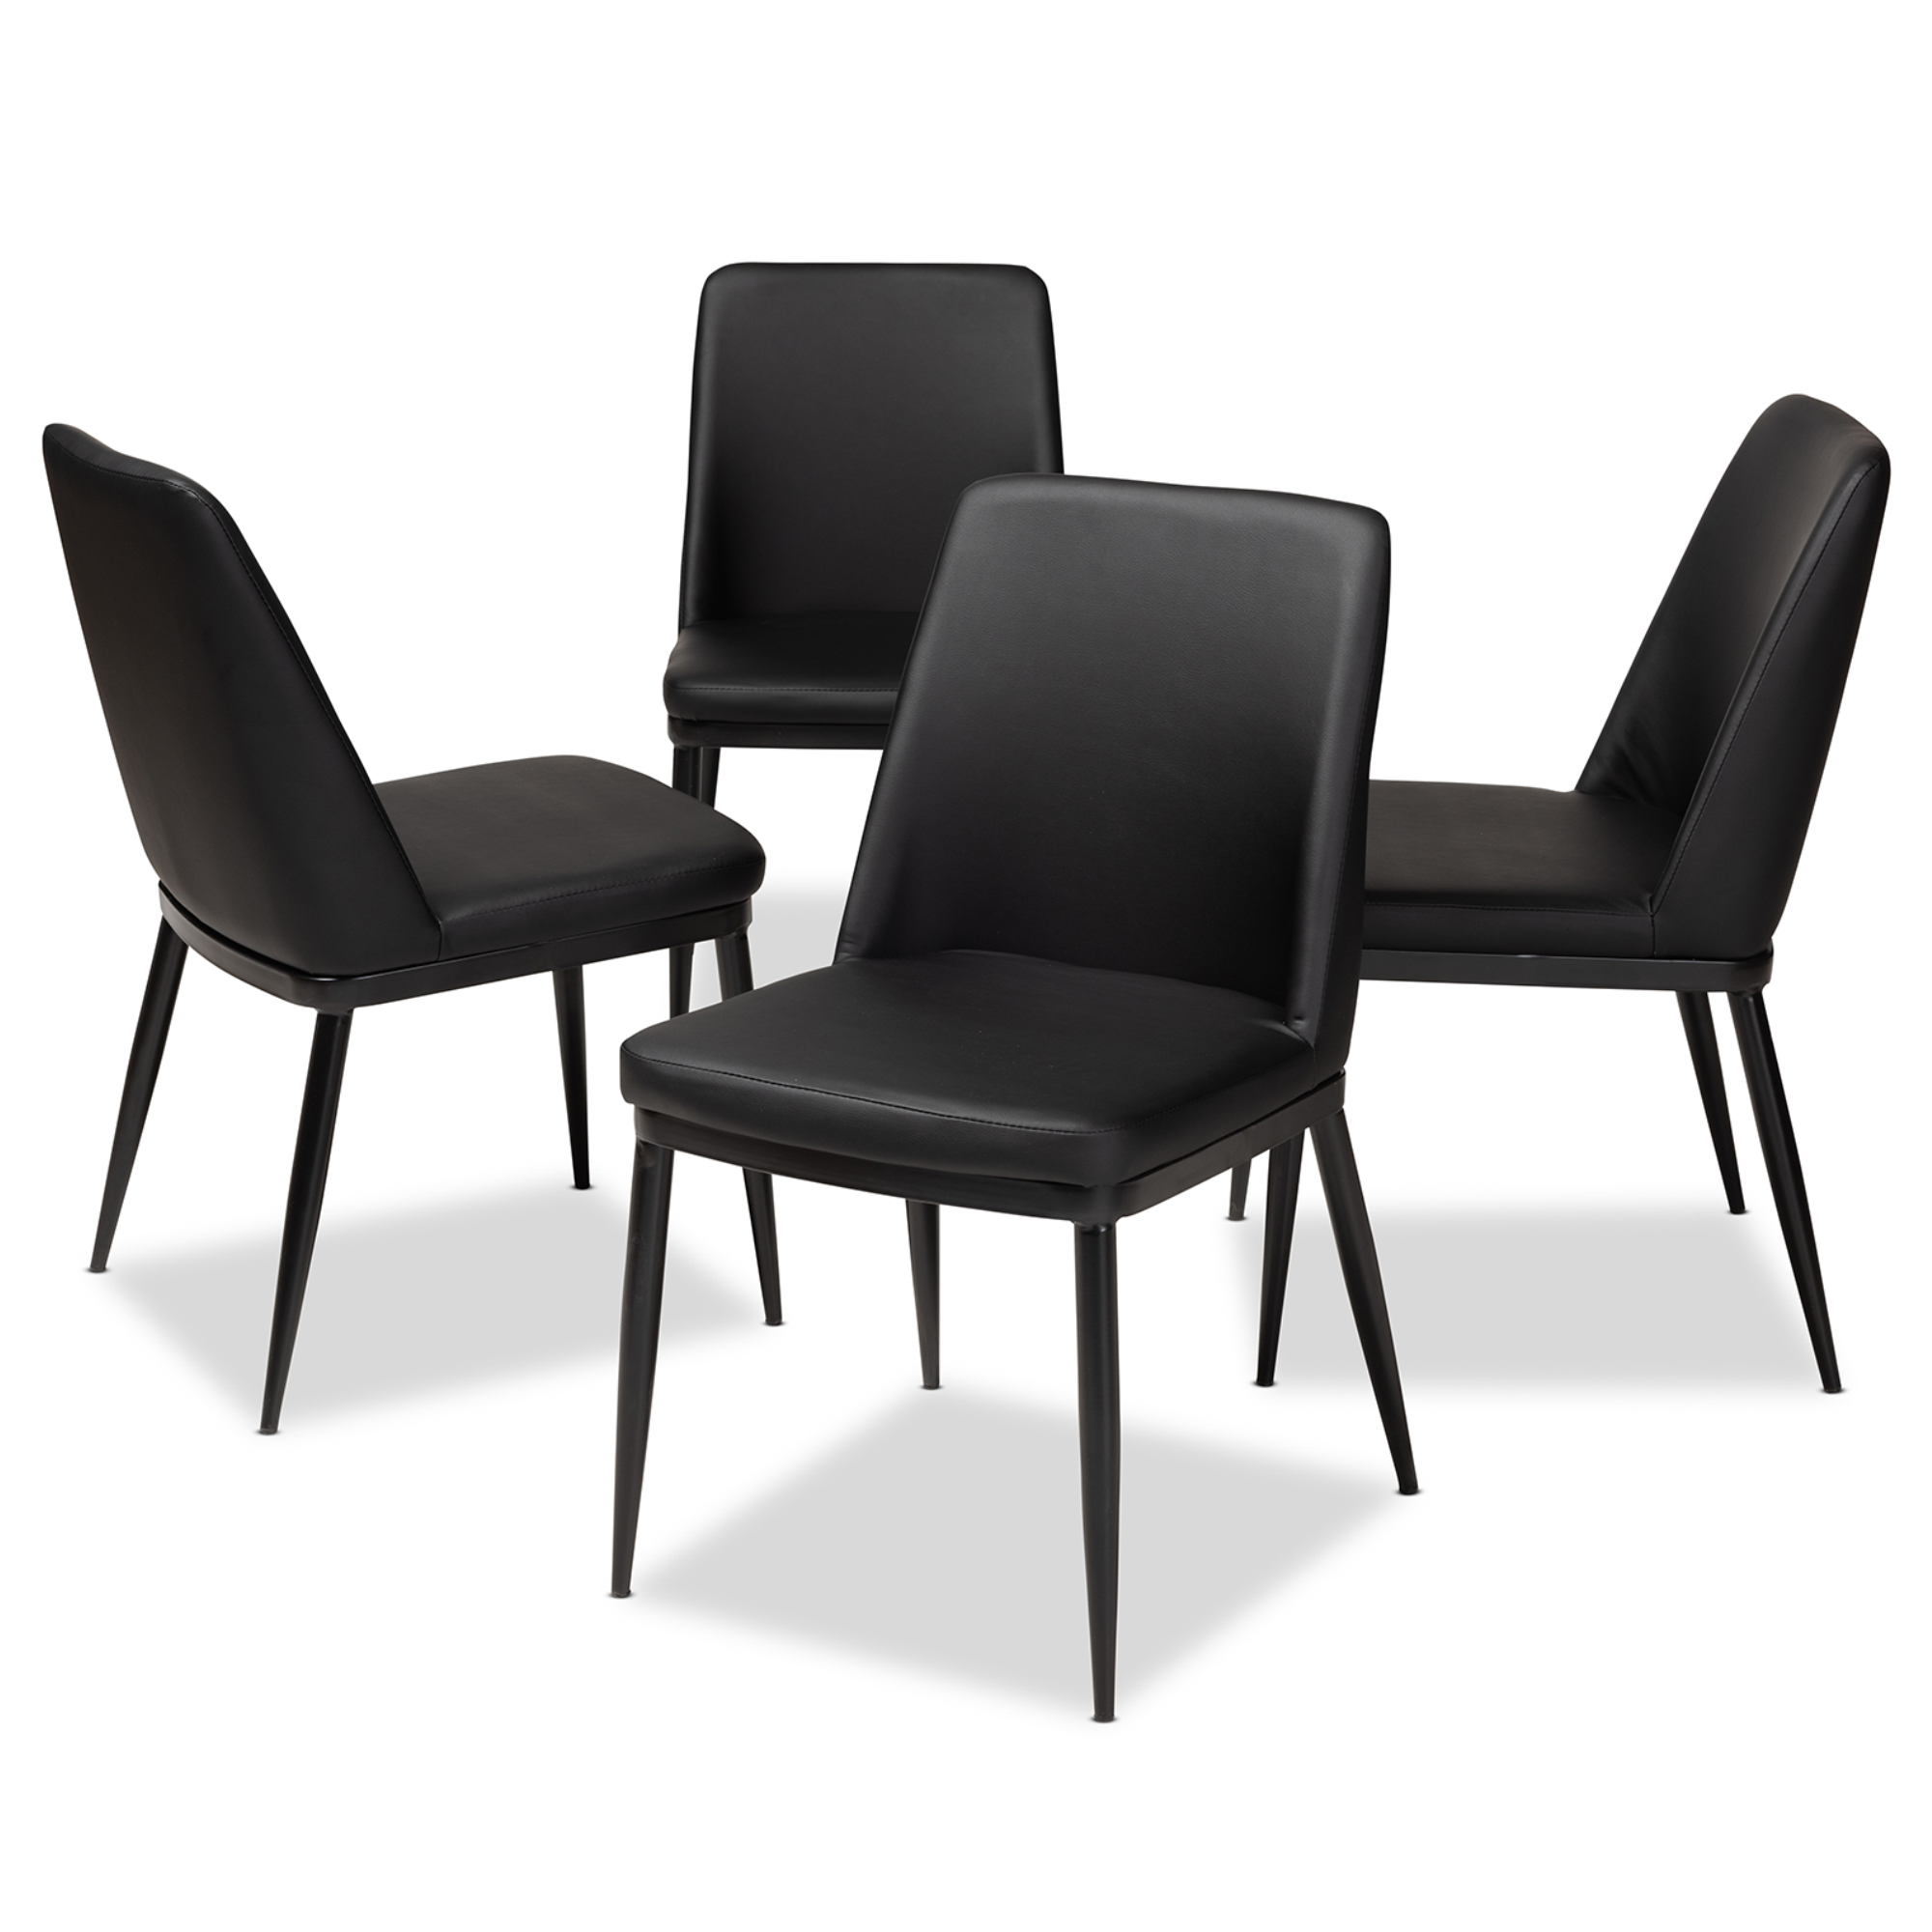 Baxton Studio Darcell Modern and Contemporary Black Faux Leather Upholstered Dining Chair (Set of 4)